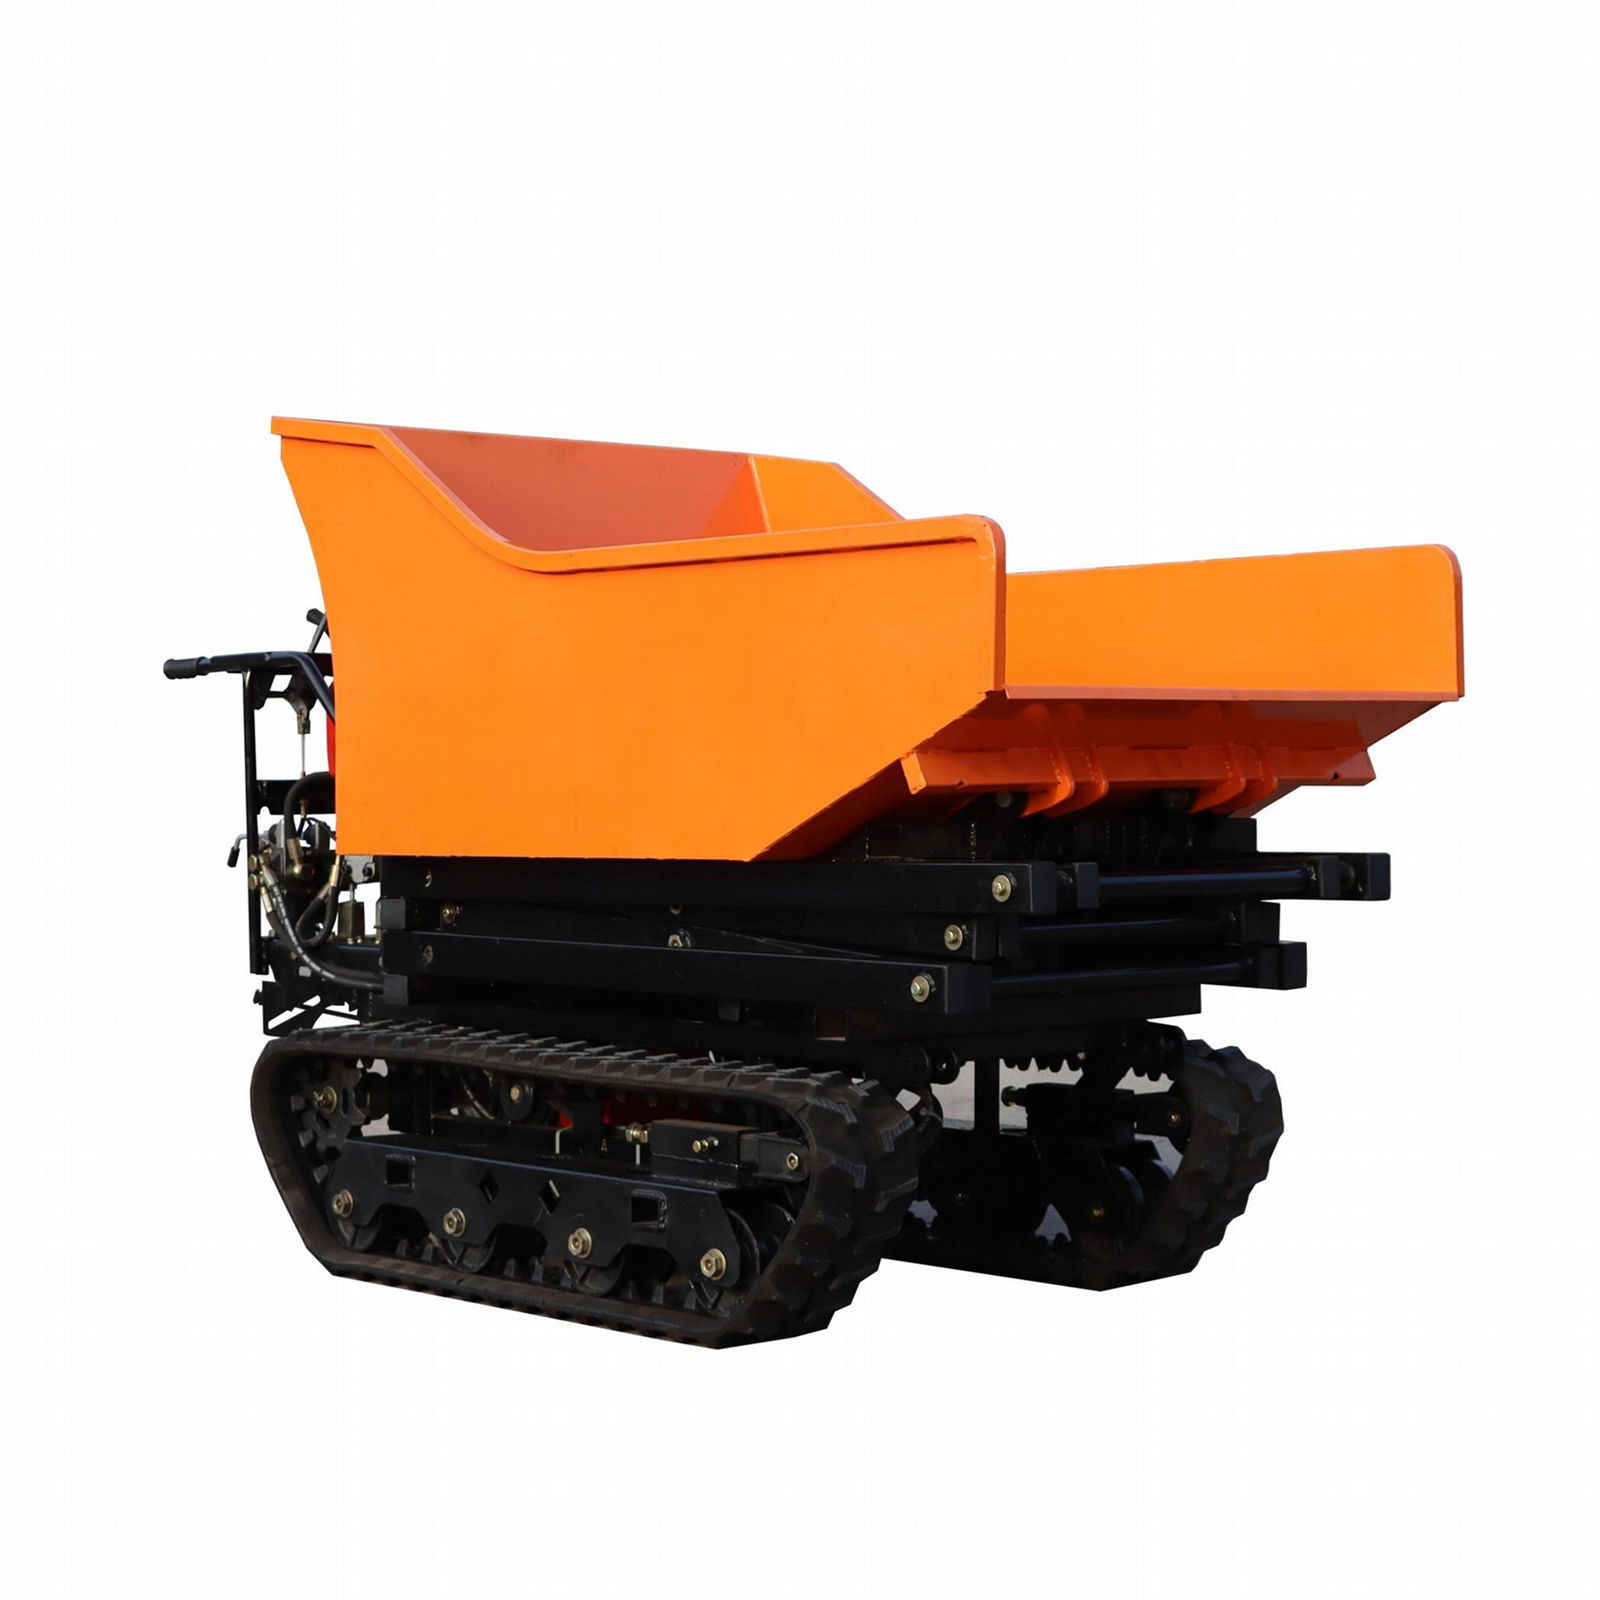  palm oil garden Crawler type dumper with lift container 2